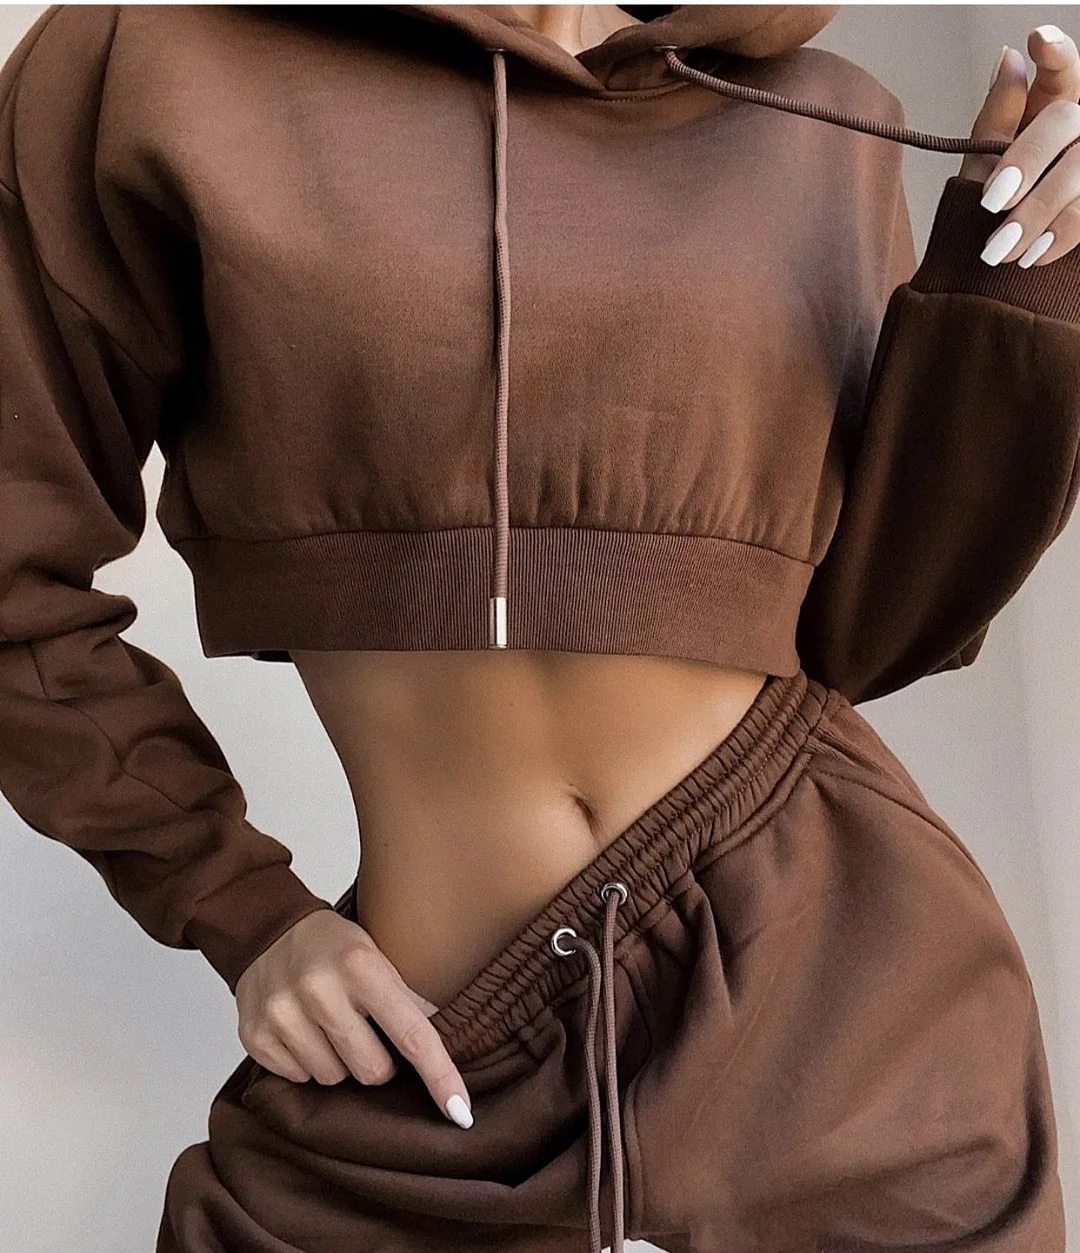 Abebey Winter Fashion Outfits for Women Tracksuit Hoodies Sweatshirt and Sweatpants Casual Sports 2 Piece Set Sweatsuits